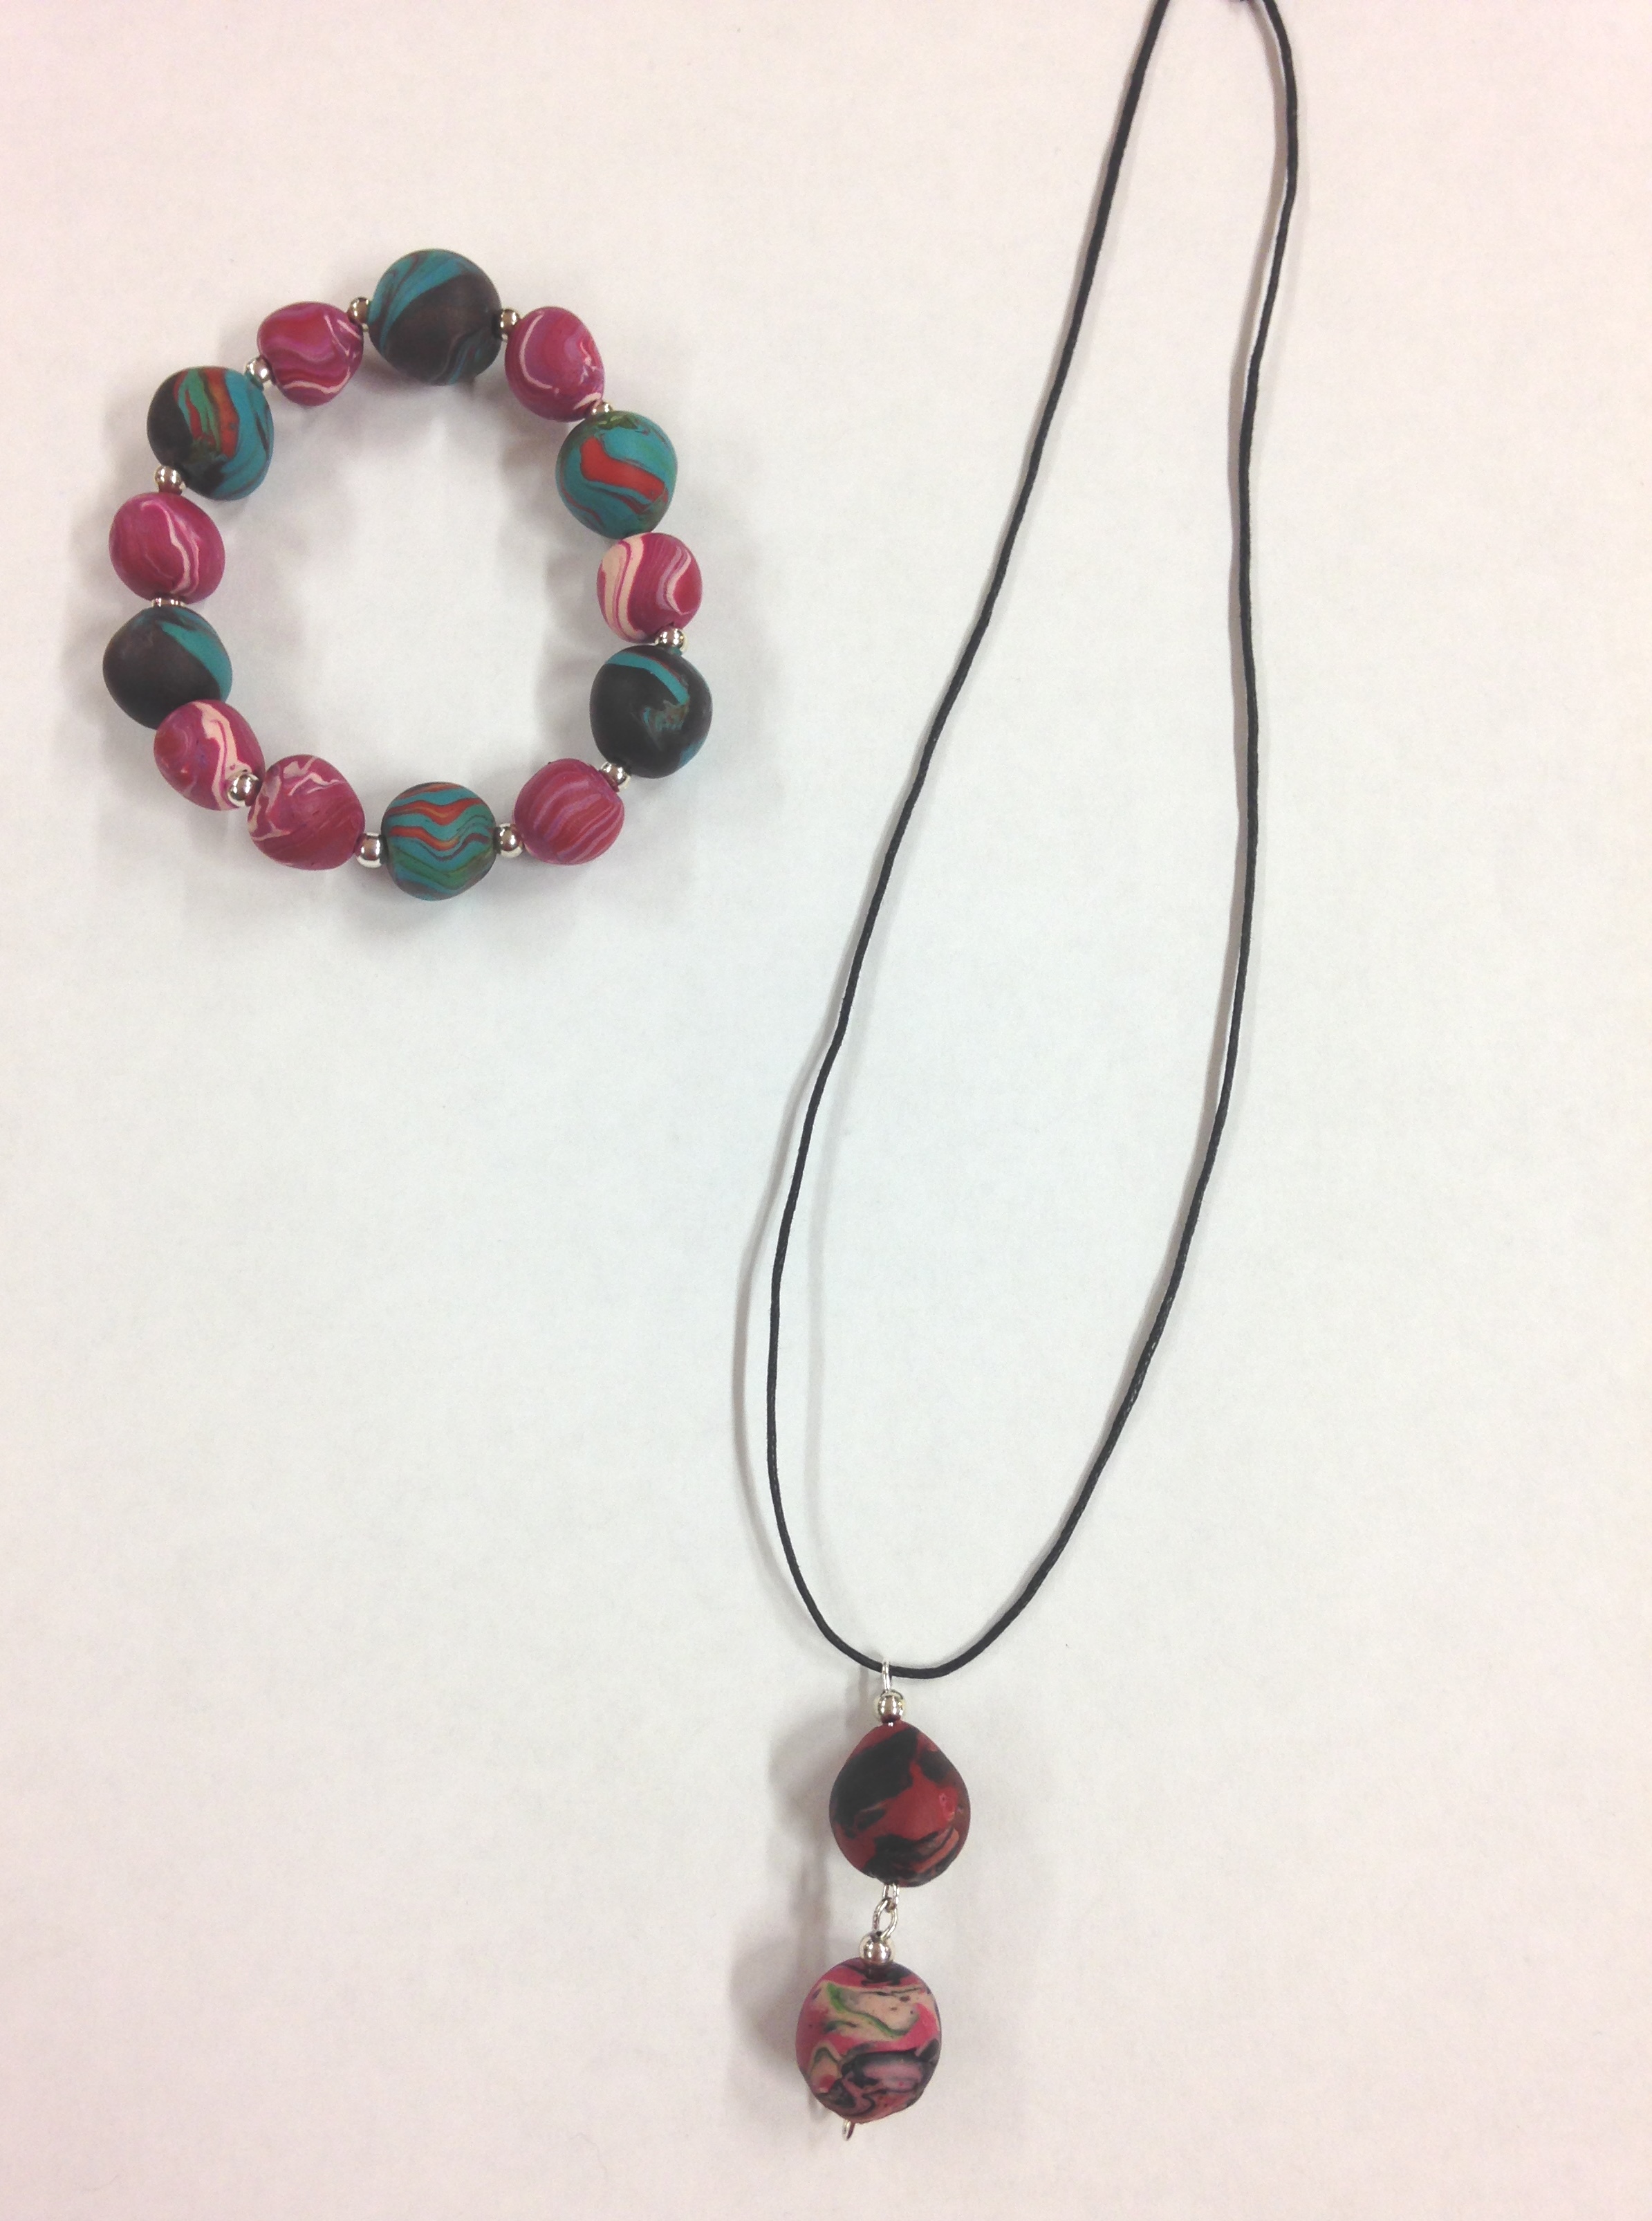 necklace with two balls and a necklace with alternating pink/ white and blue/ black pearls